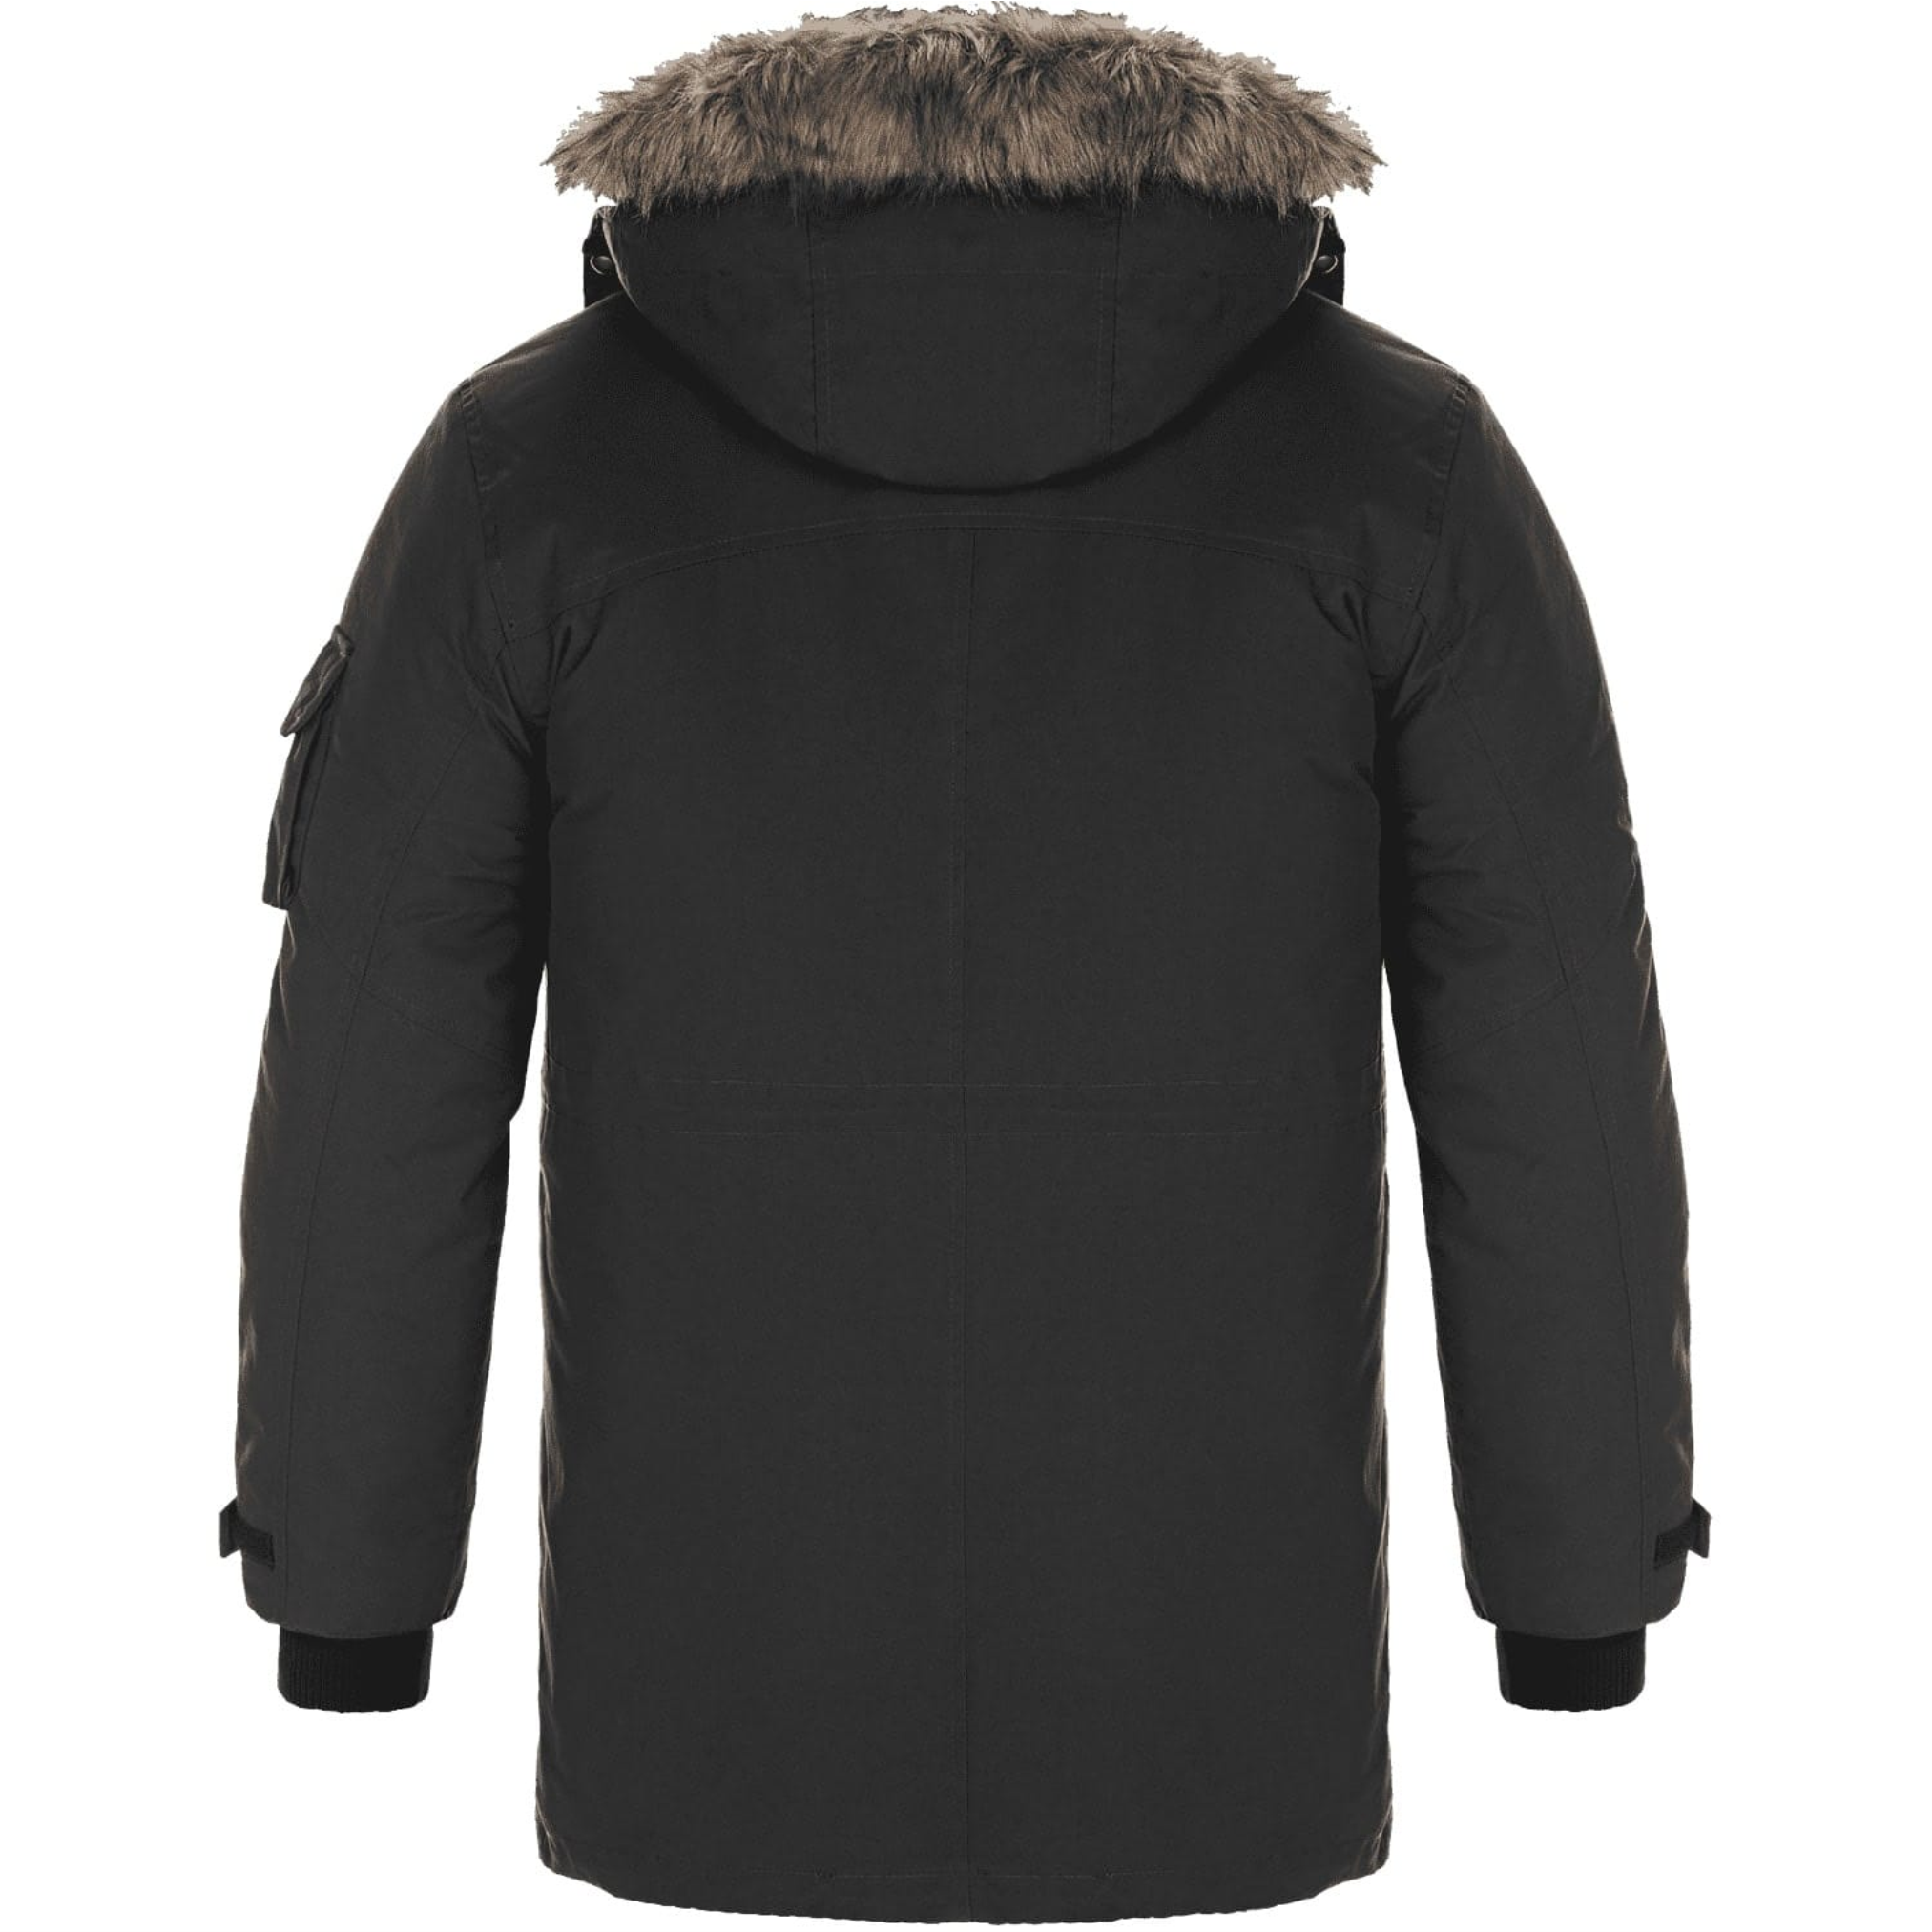 Clam Outdoors EdgeX Cold Weather Parka, Men's, 3XL, Black/Charcoal